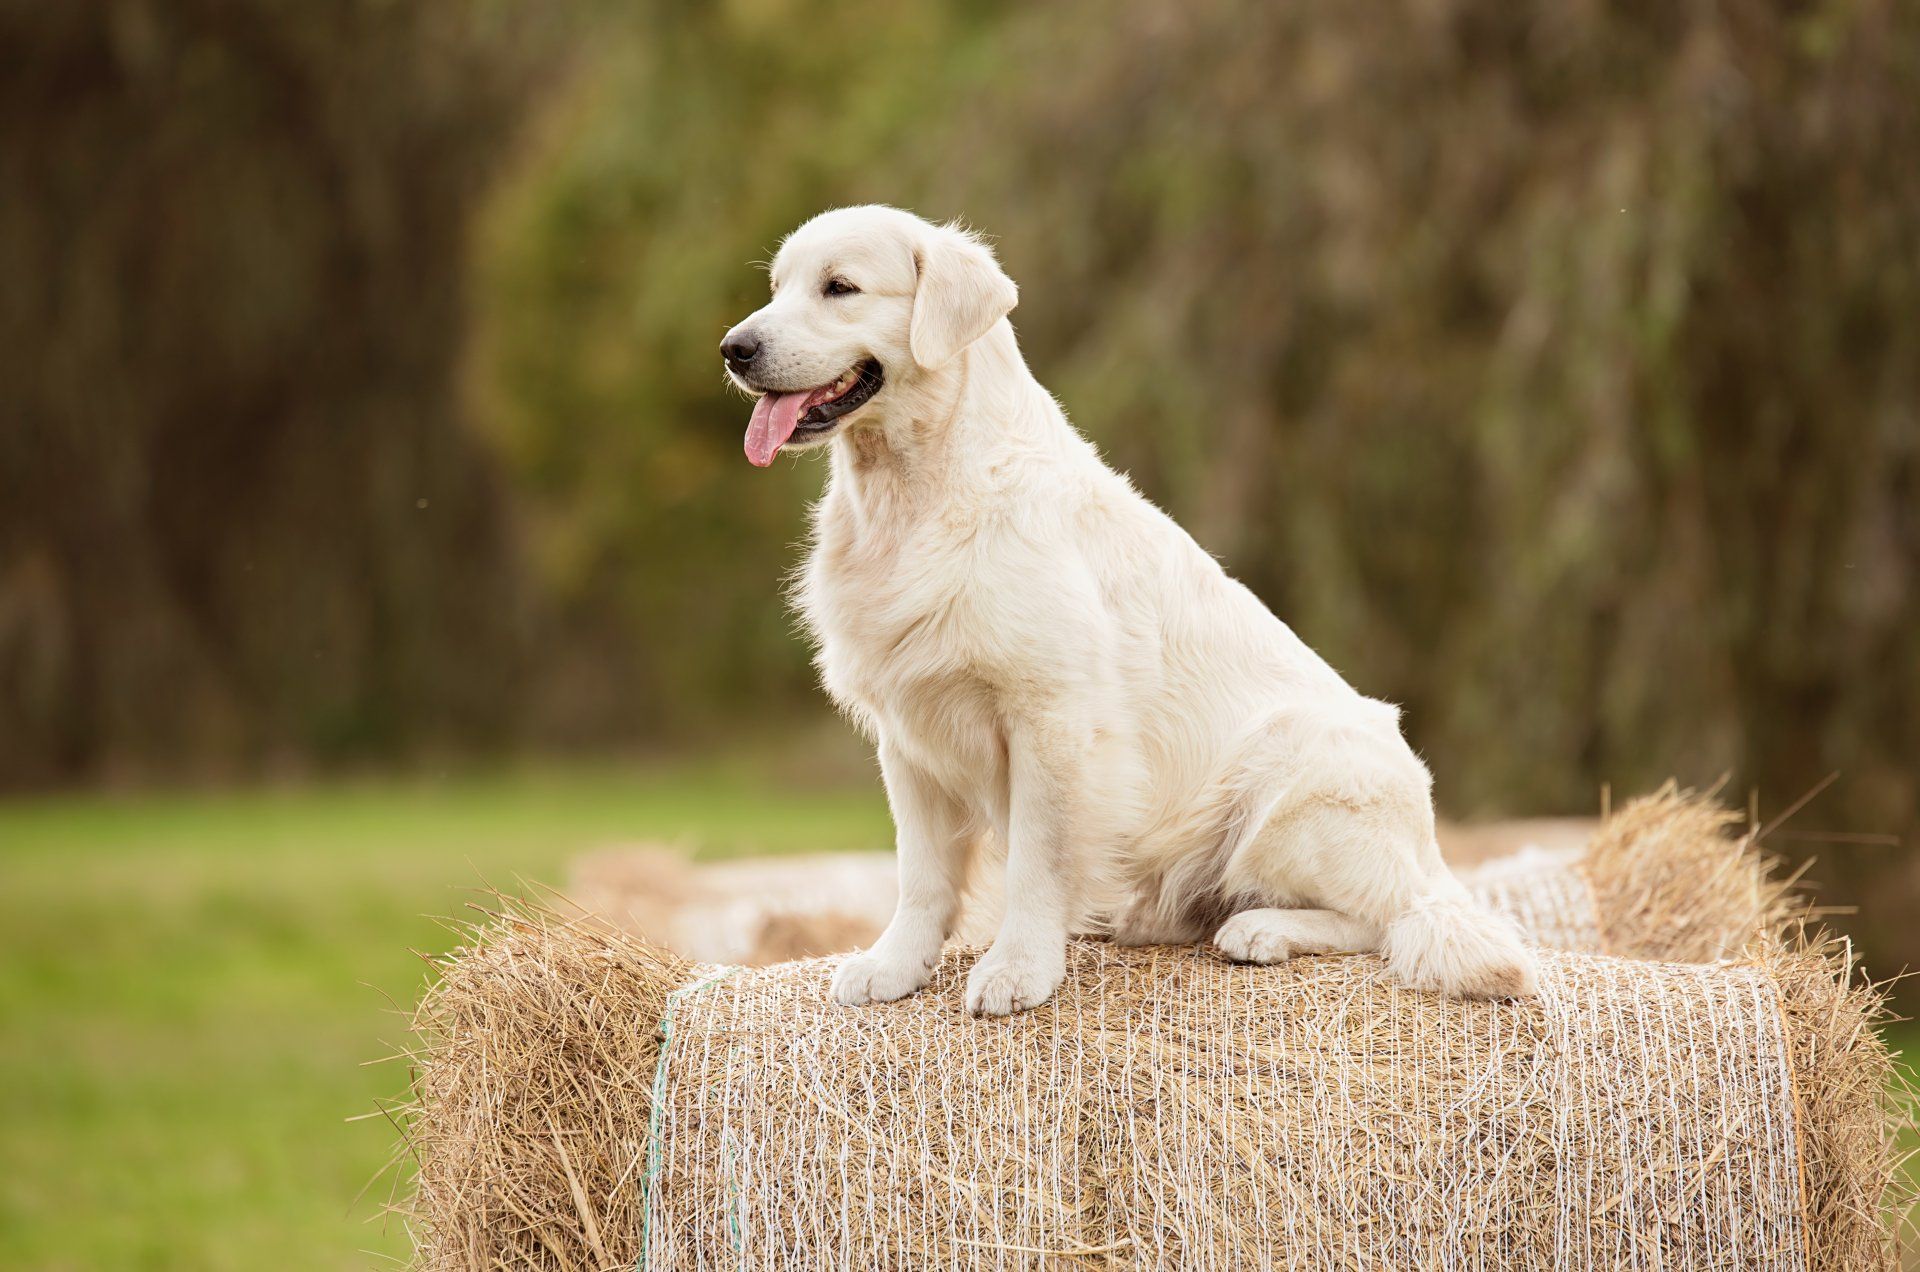 A white dog is sitting on top of a bale of hay.